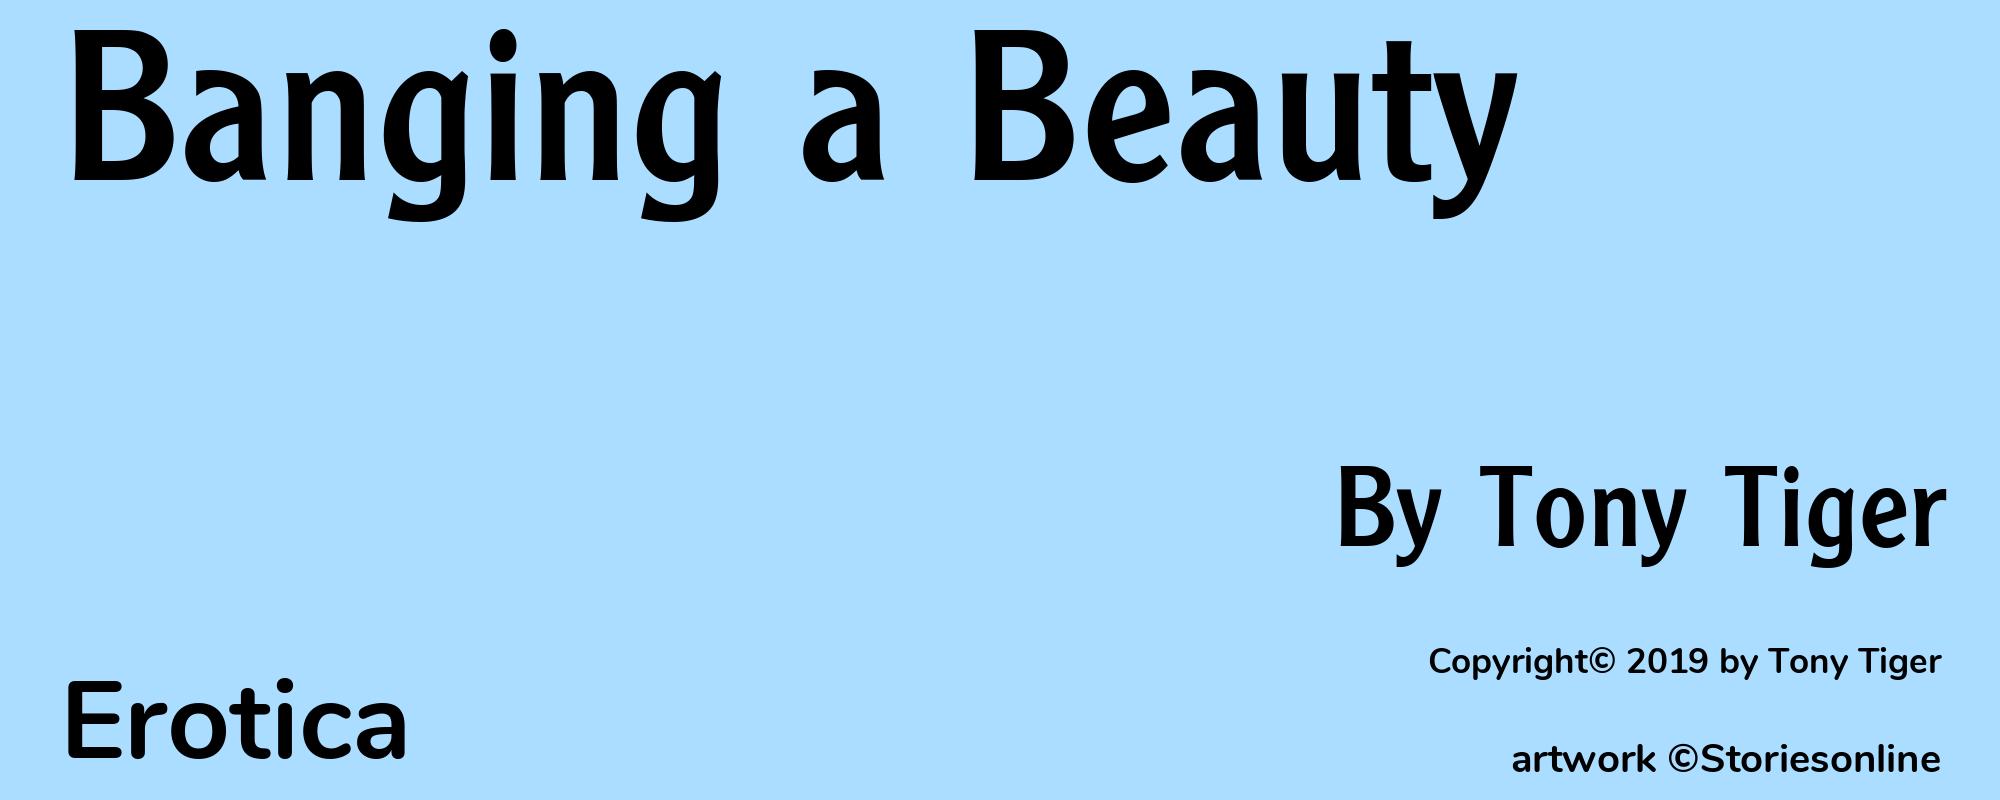 Banging a Beauty - Cover